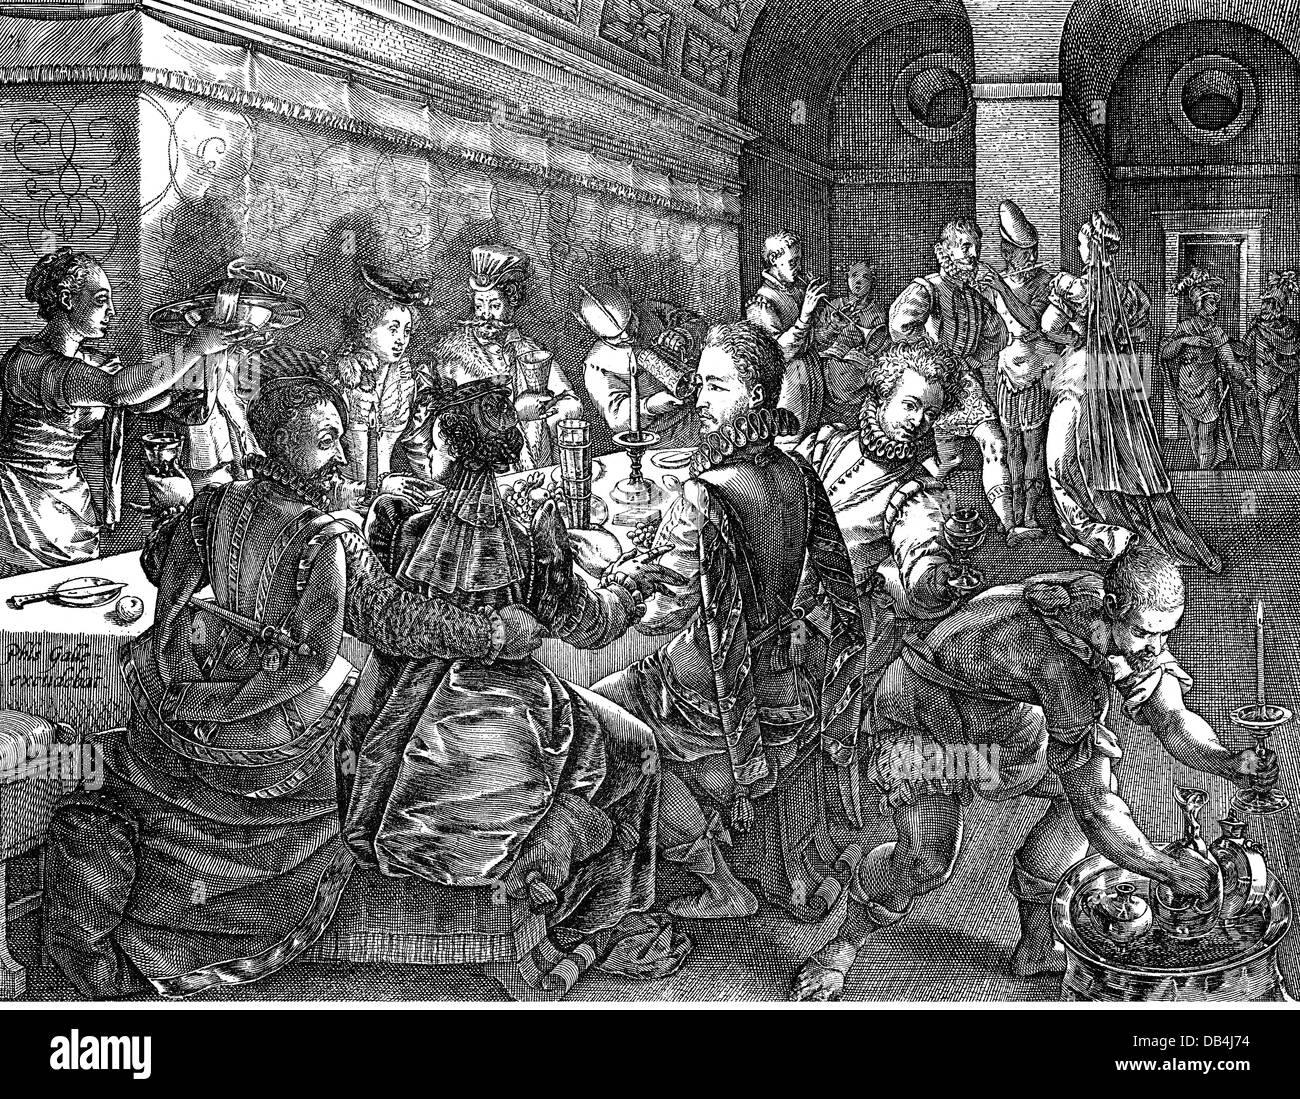 gastronomy, meals, Roman banquet, after Jan van der Straet (1523 - 1605), copper engraving, by Philipp Galle (1537 - 1612), 16th century, 16th century, graphic, graphics, Netherlands, food, meal, meals, half length, sitting, sit, table, tables, chairs, chair, fashion, clothes, outfit, outfits, hat, hats, collar, collars, doublet, jerkin, sleeve, sleeves, dress, dresses, glasses, drinking, drink, conversation, conversations, talks, talk, talking, servant, servants, manservant, menservants, carafe, decanter, decanters, pour, pouring, srve, serving, socie, Artist's Copyright has not to be cleared Stock Photo